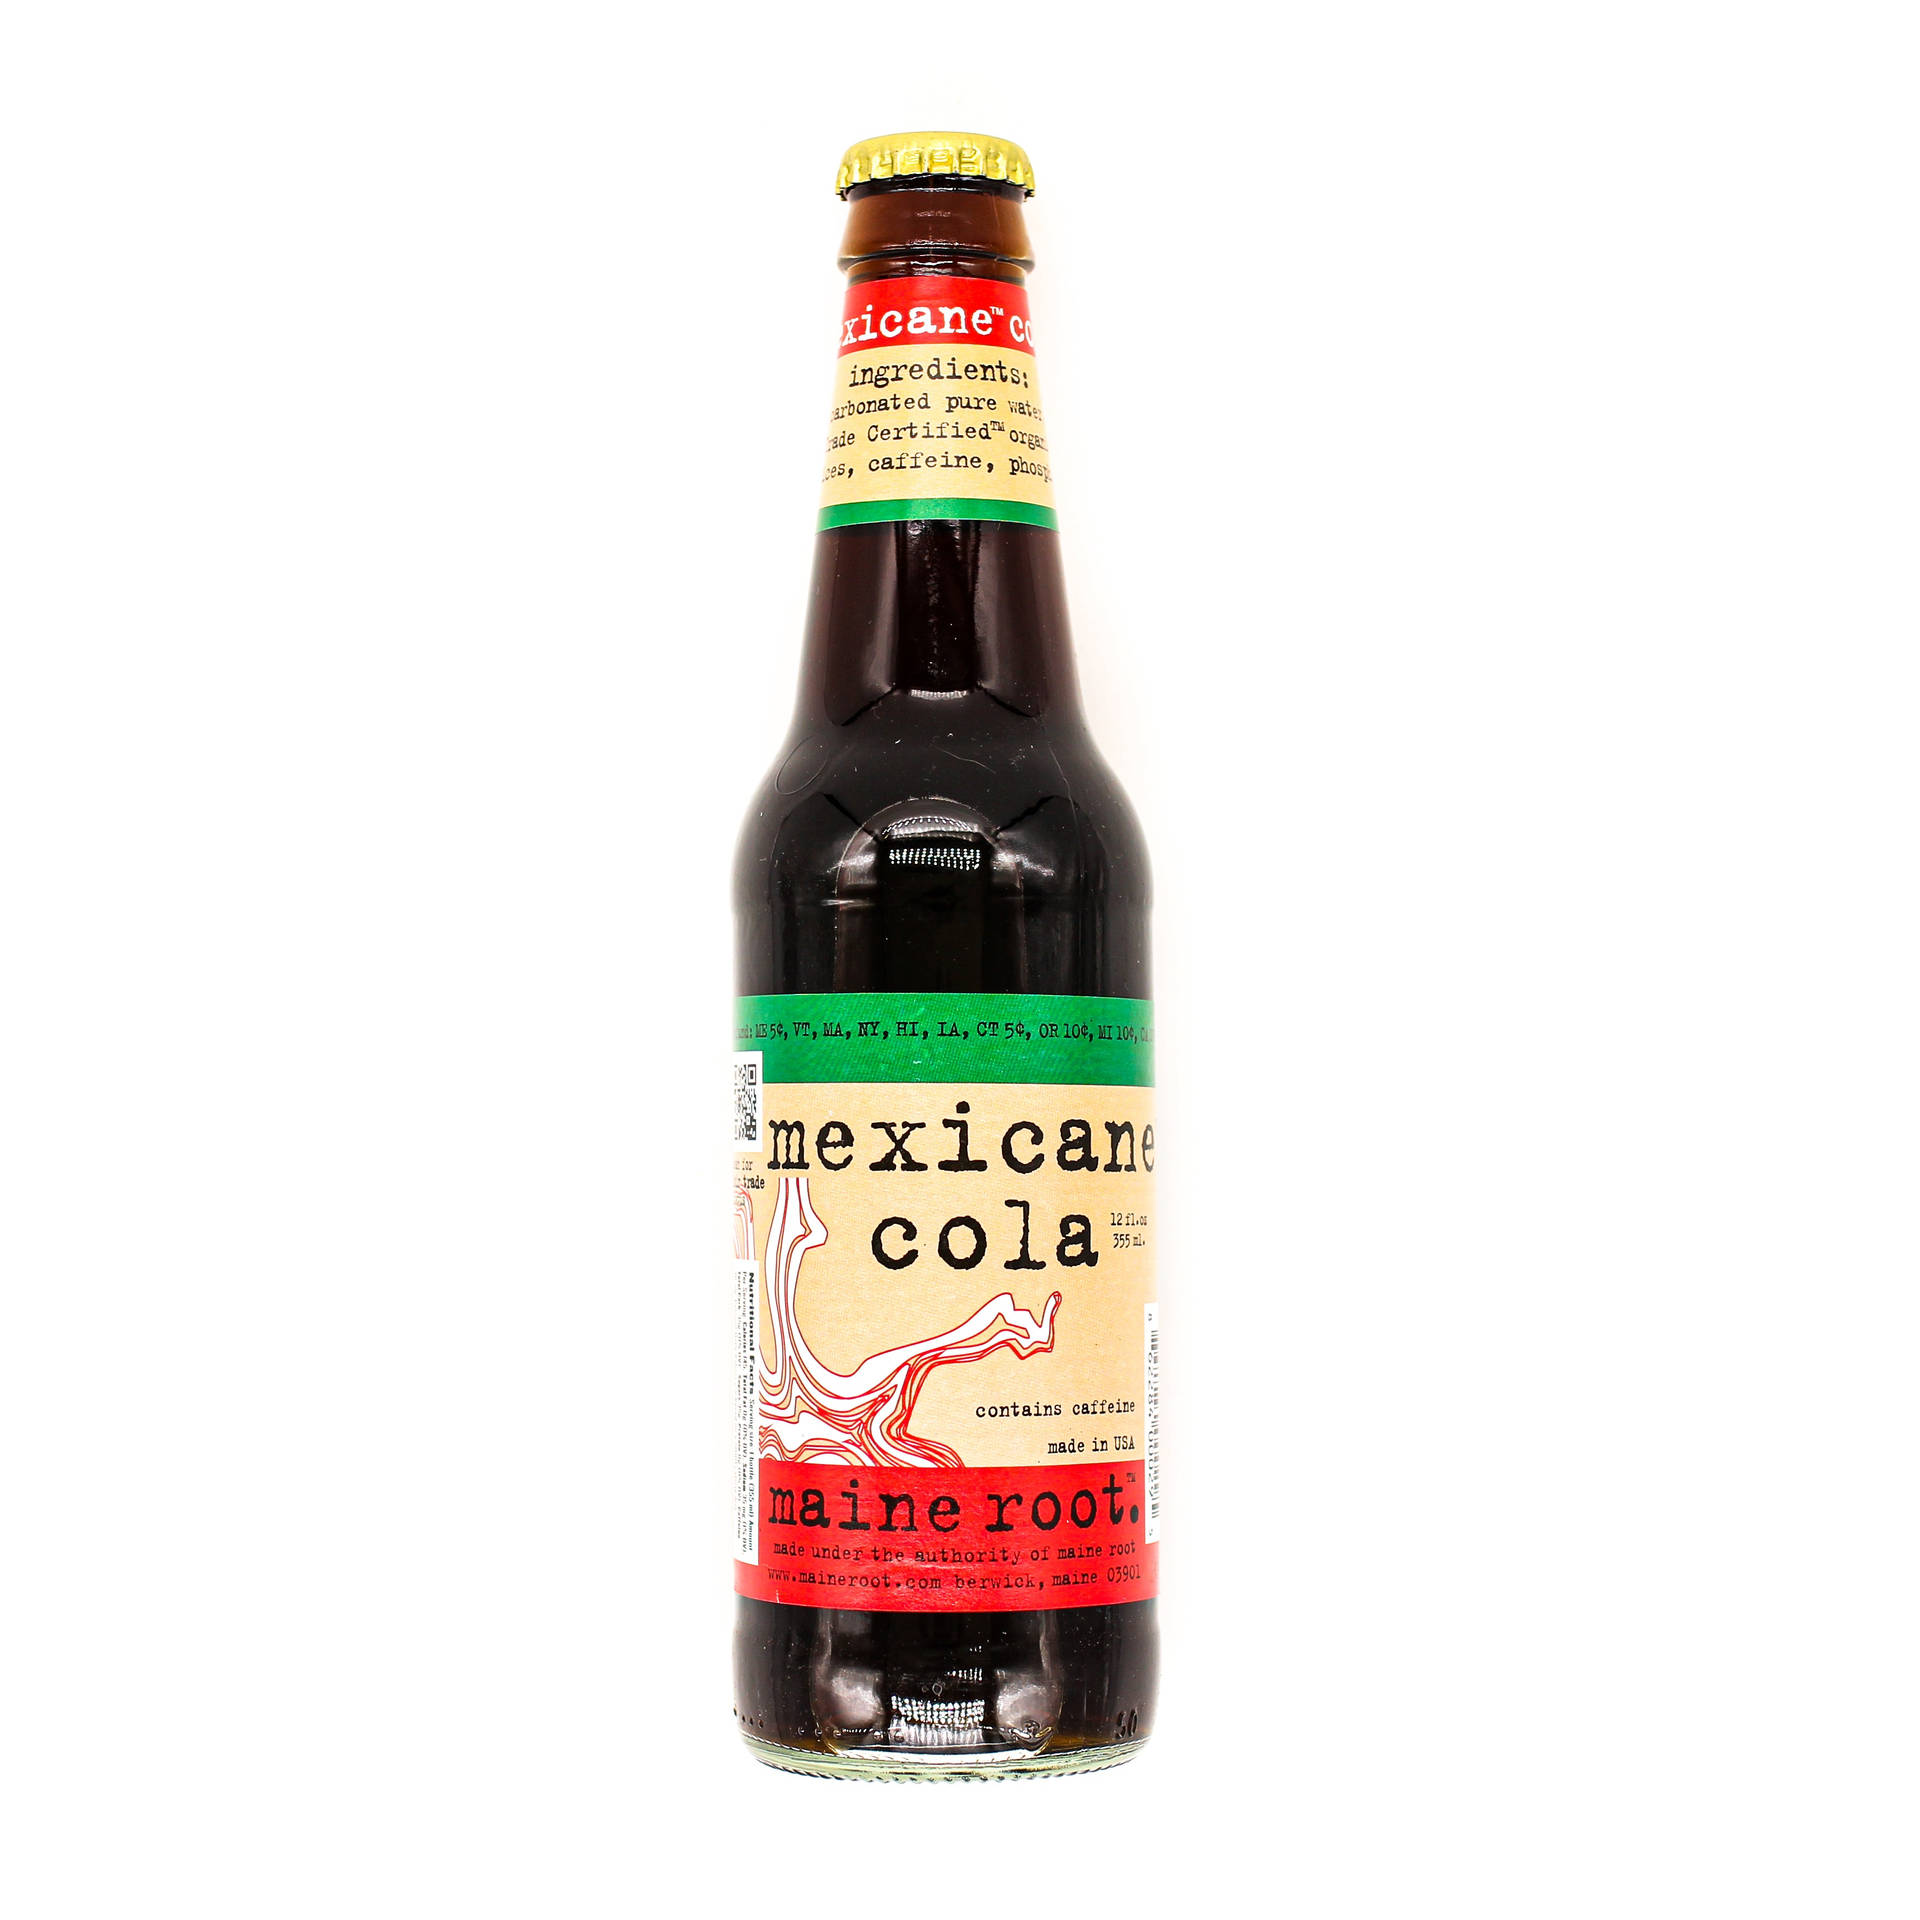 Mexican Cola Maine Root Drink Wallpaper